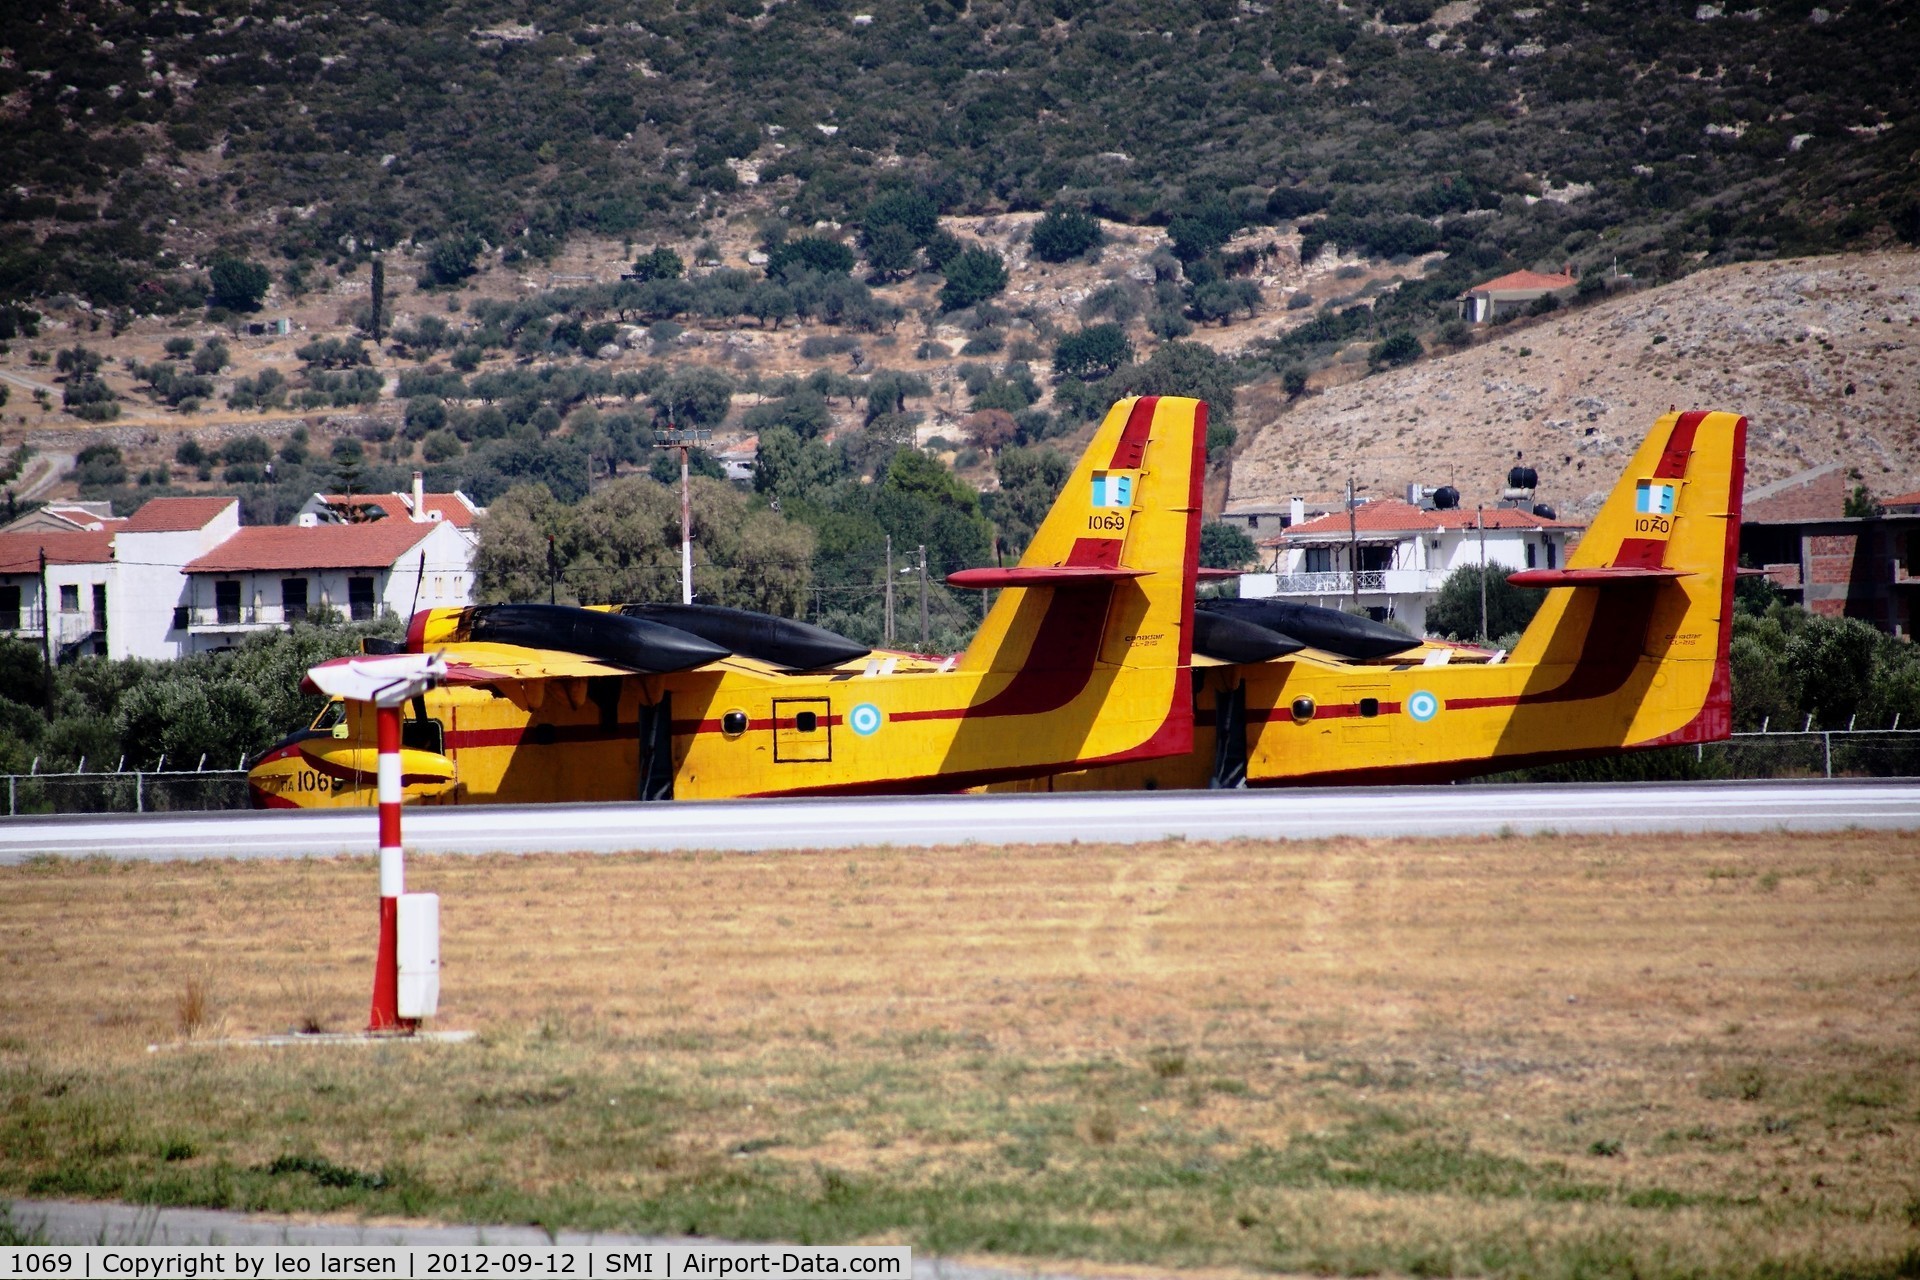 1069, Canadair CL-215-IV (CL-215-1A10) C/N 1069, Samosn12.9.2012 1069+1070 together in SMI